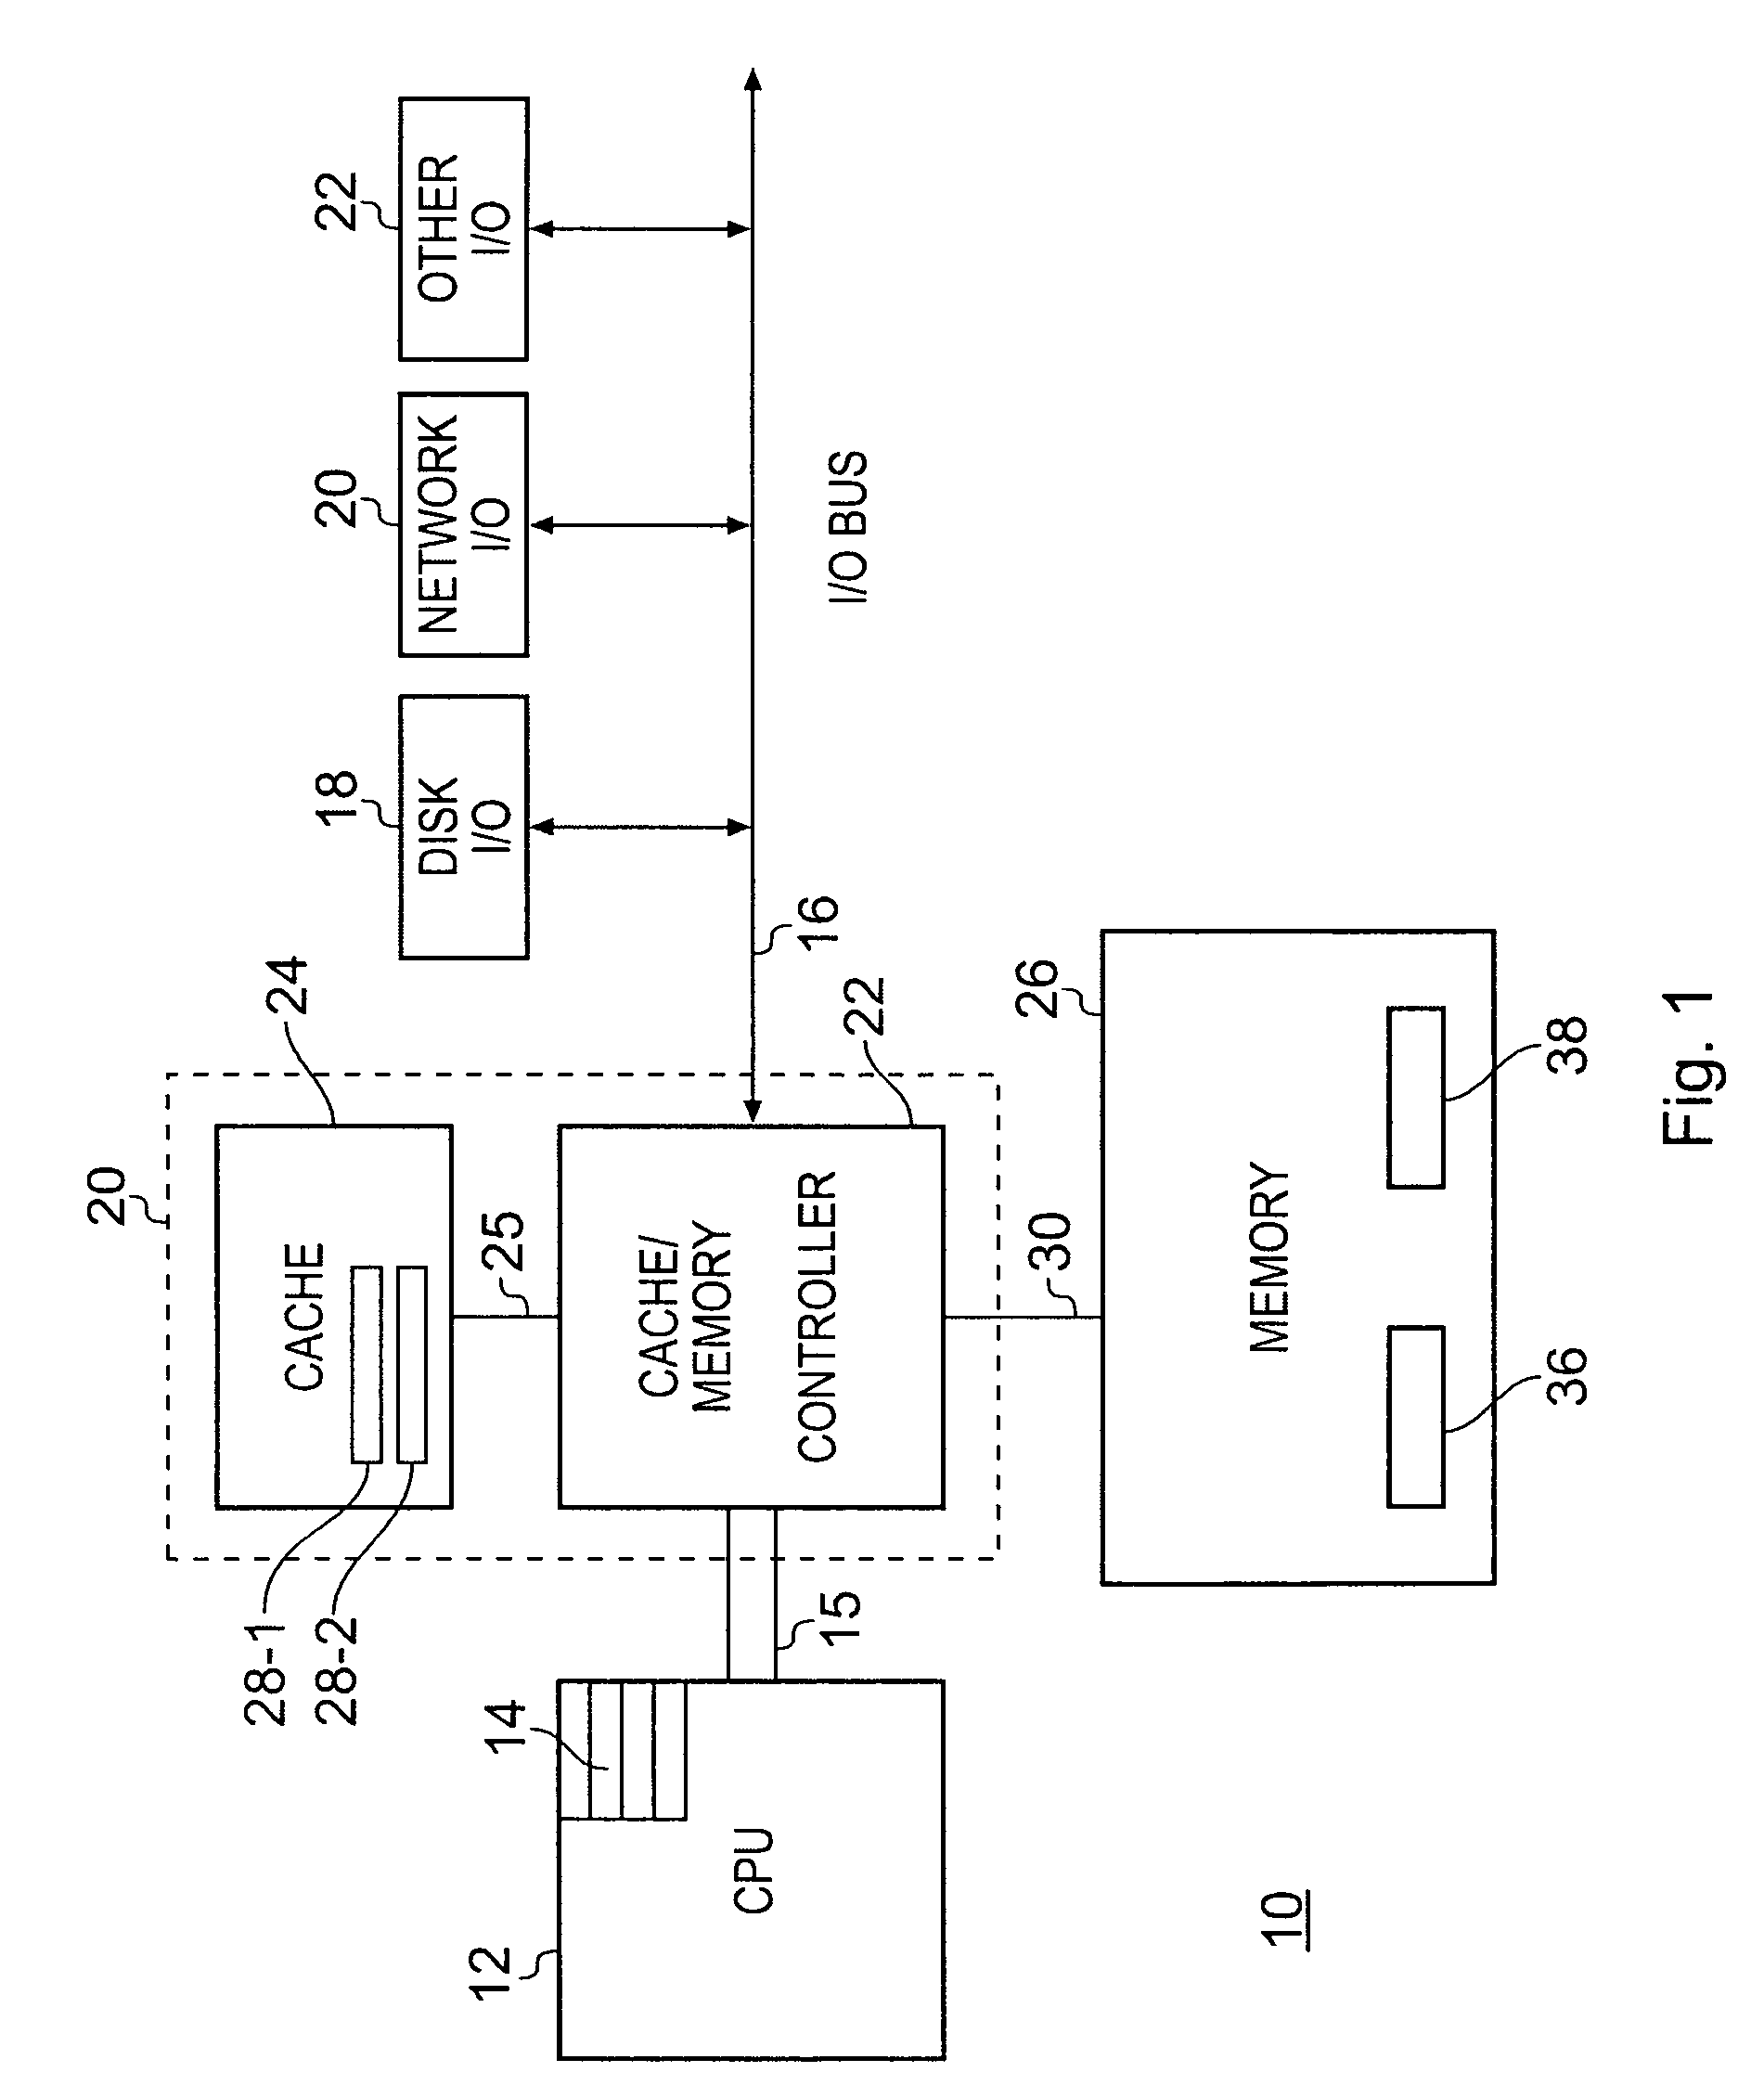 Memory error analysis for determining potentially faulty memory components